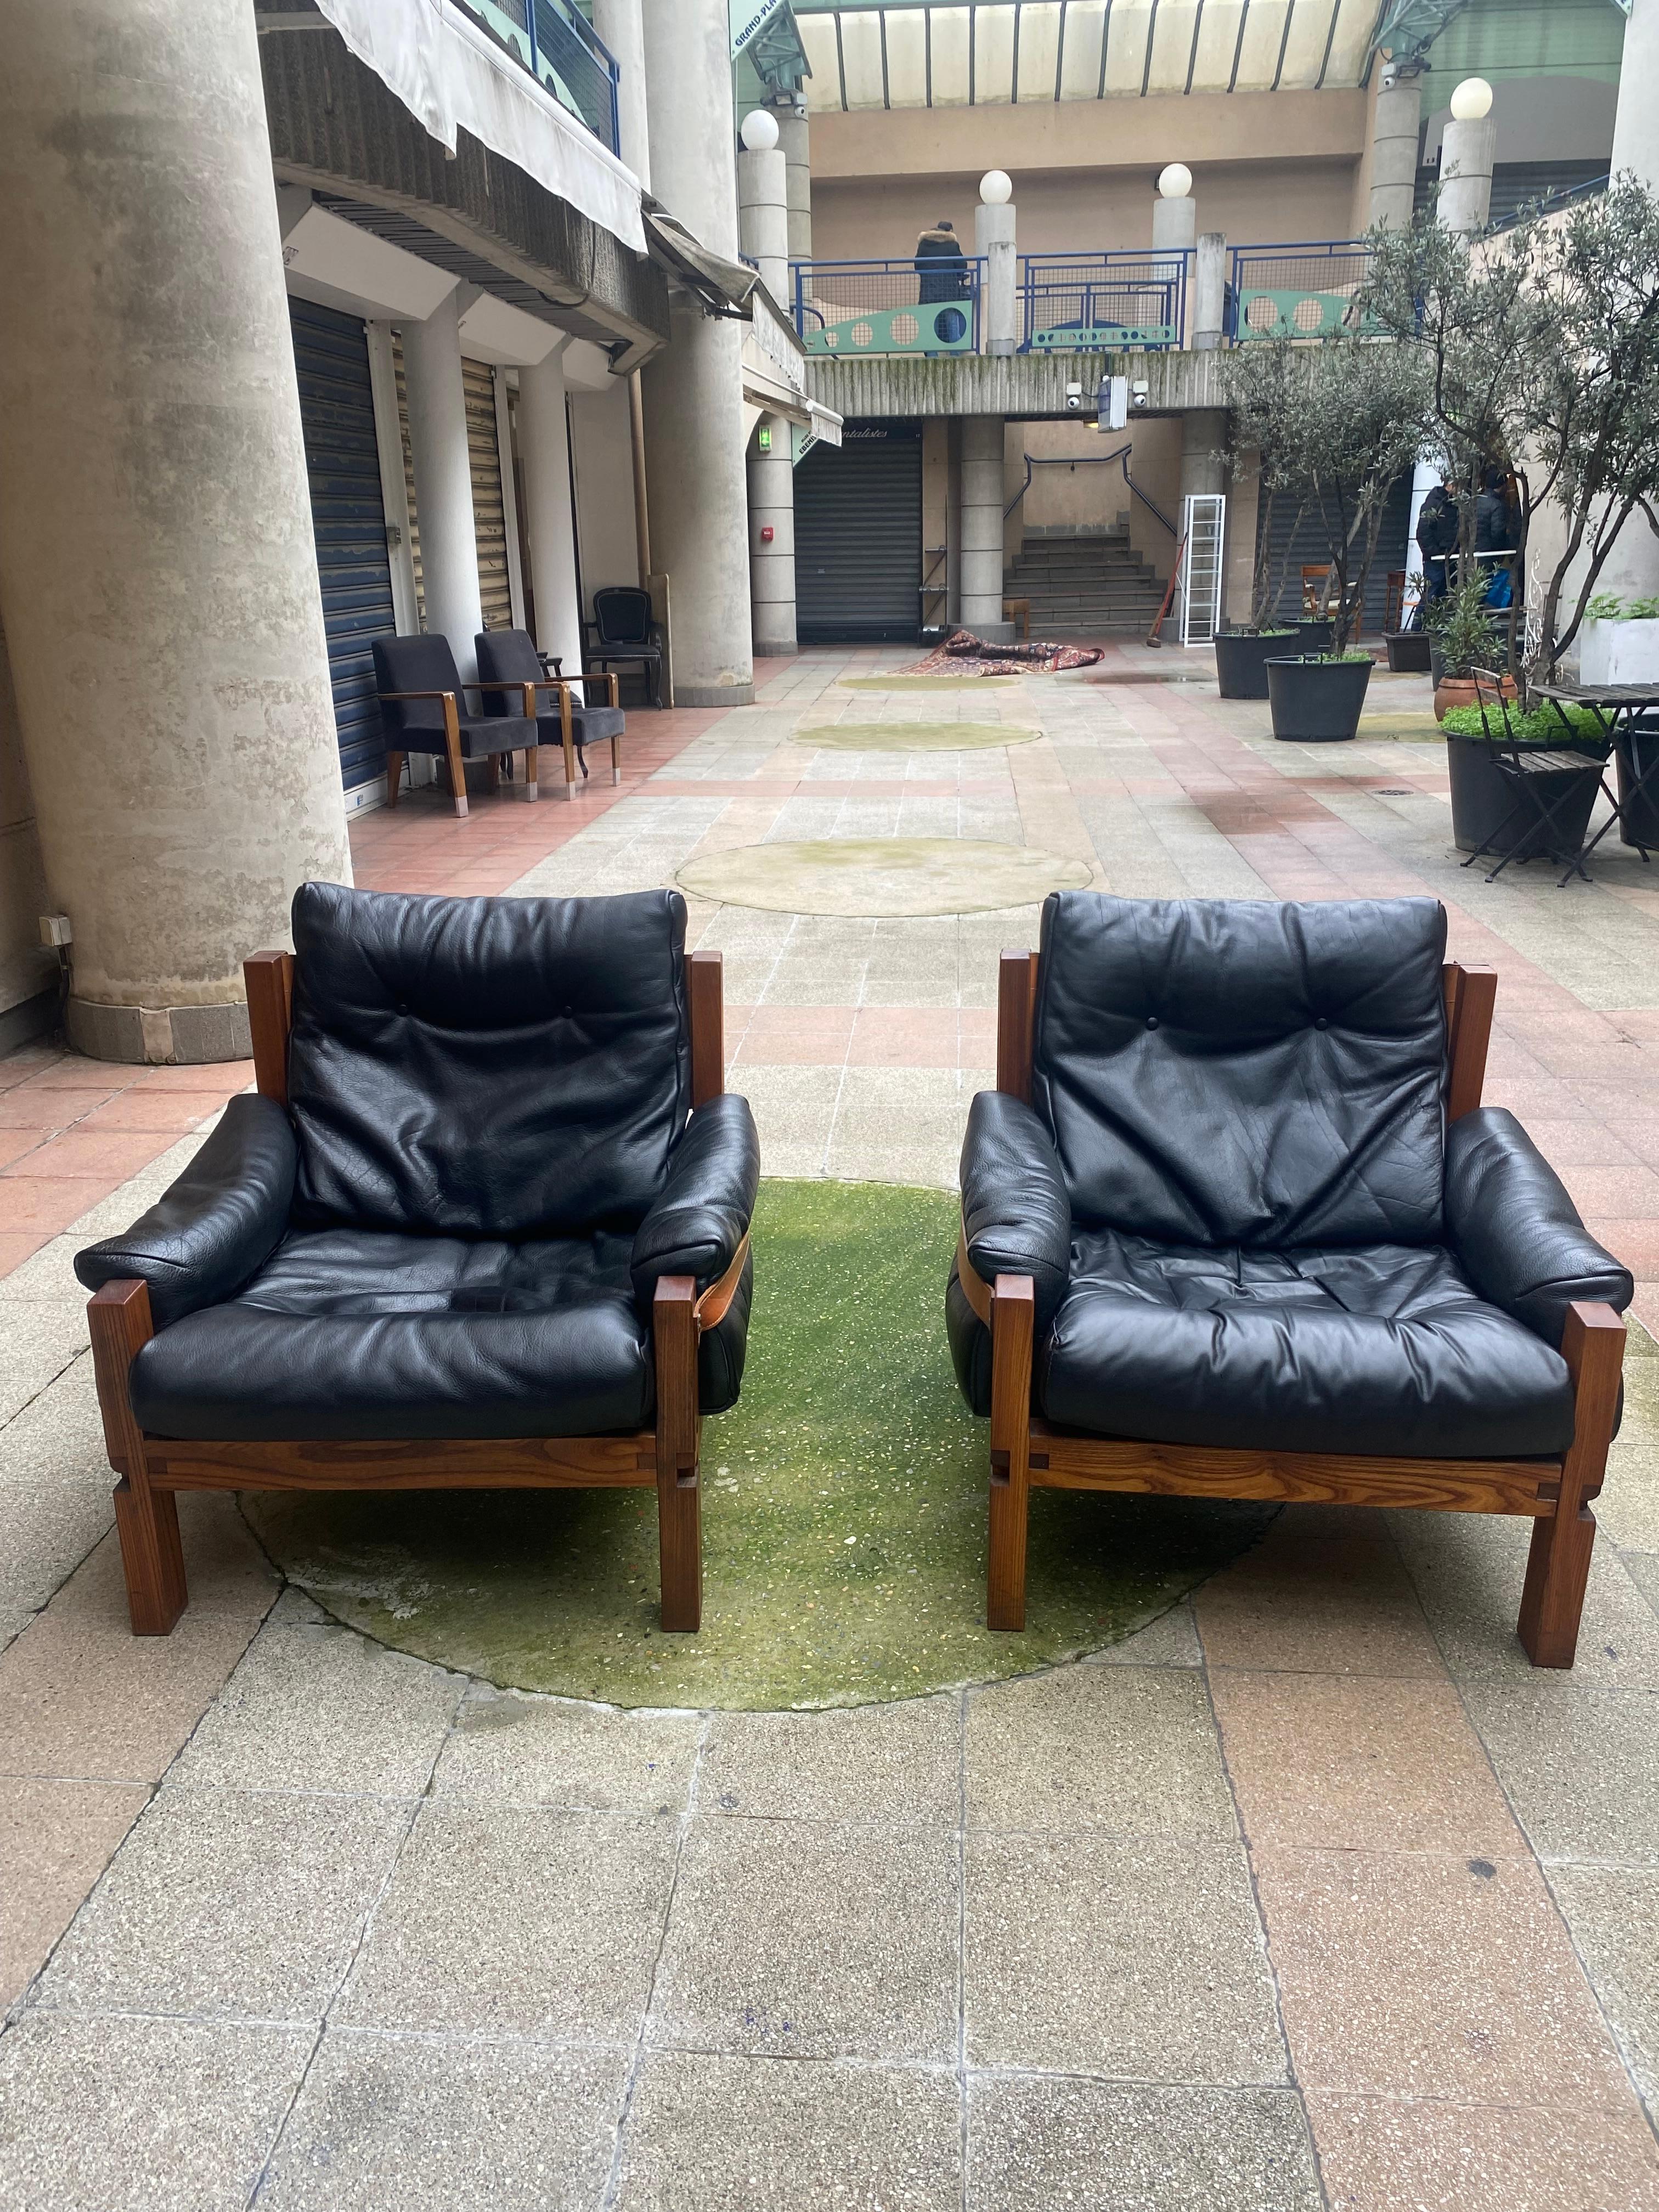 Pierre Chapo
Pair of S15 armchairs - Circa 1978
The structure is built in solid elm, the armrests, the seat and the back filled with foam are covered in superb grained black leather.
L 90 x D 85 x H 82 cms
In beautiful vintage condition